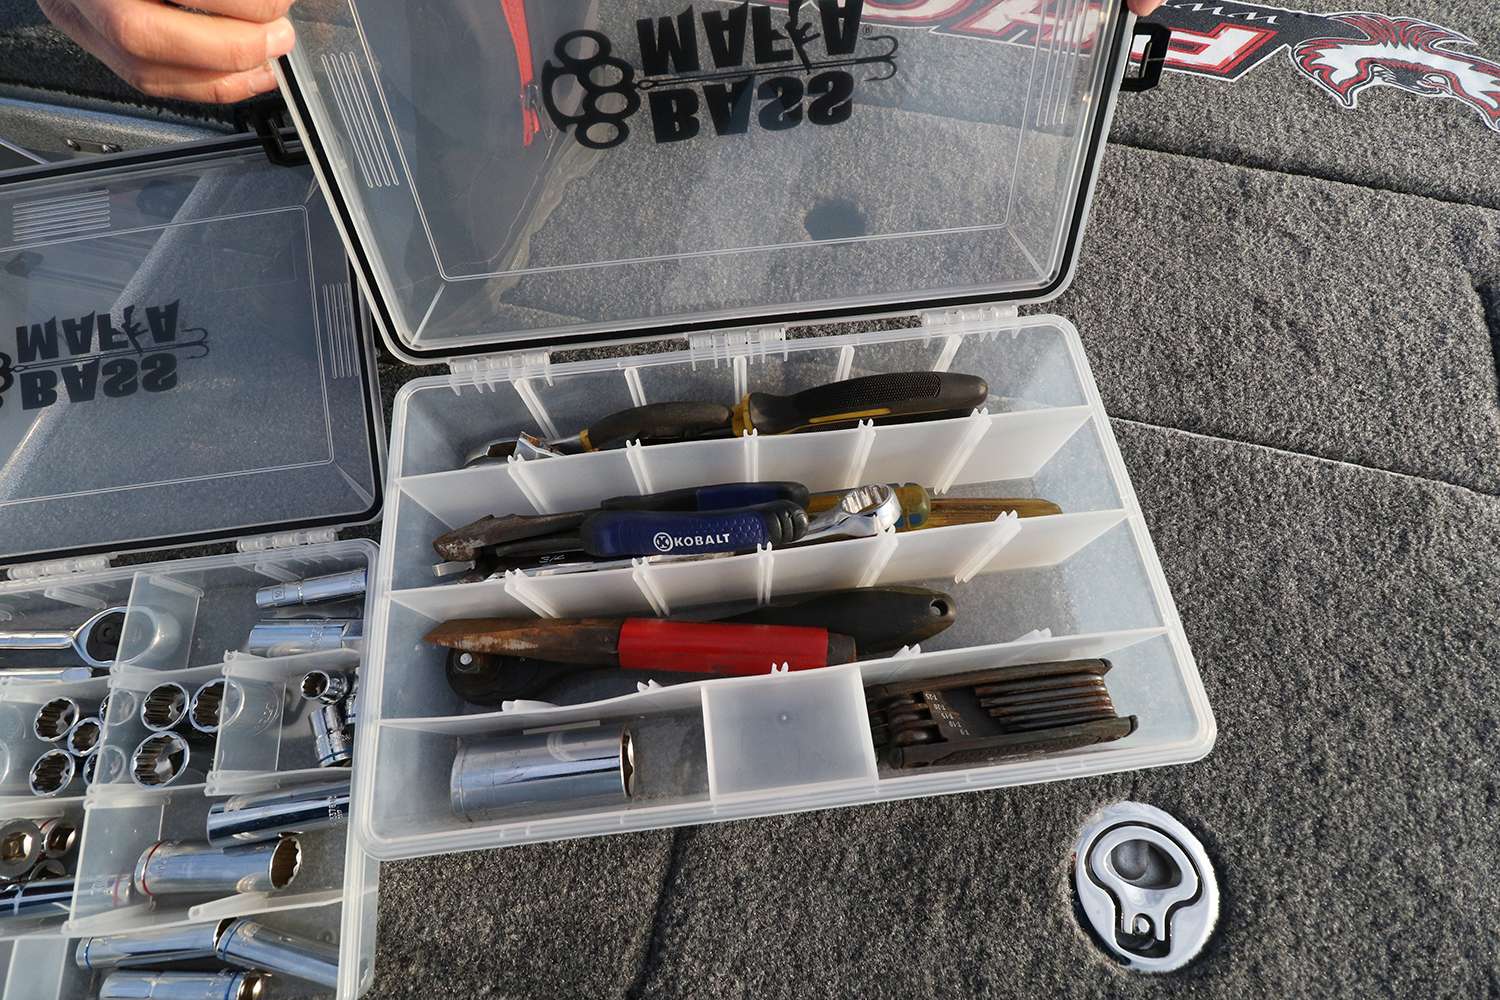 Another Bass Mafia box of tools.